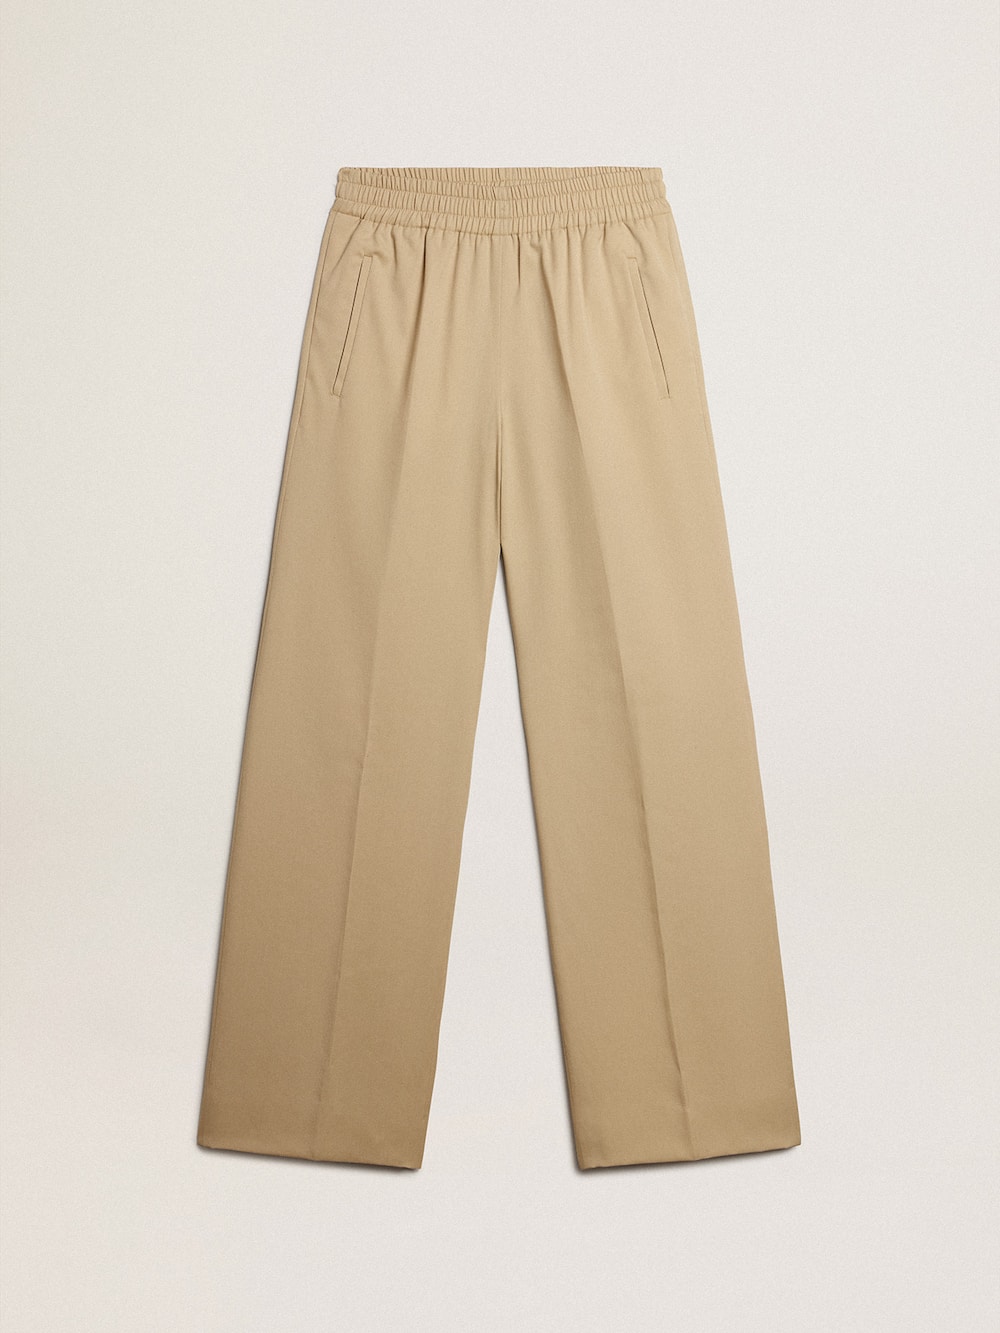 Golden Goose - Women’s sand-colored joggers in 